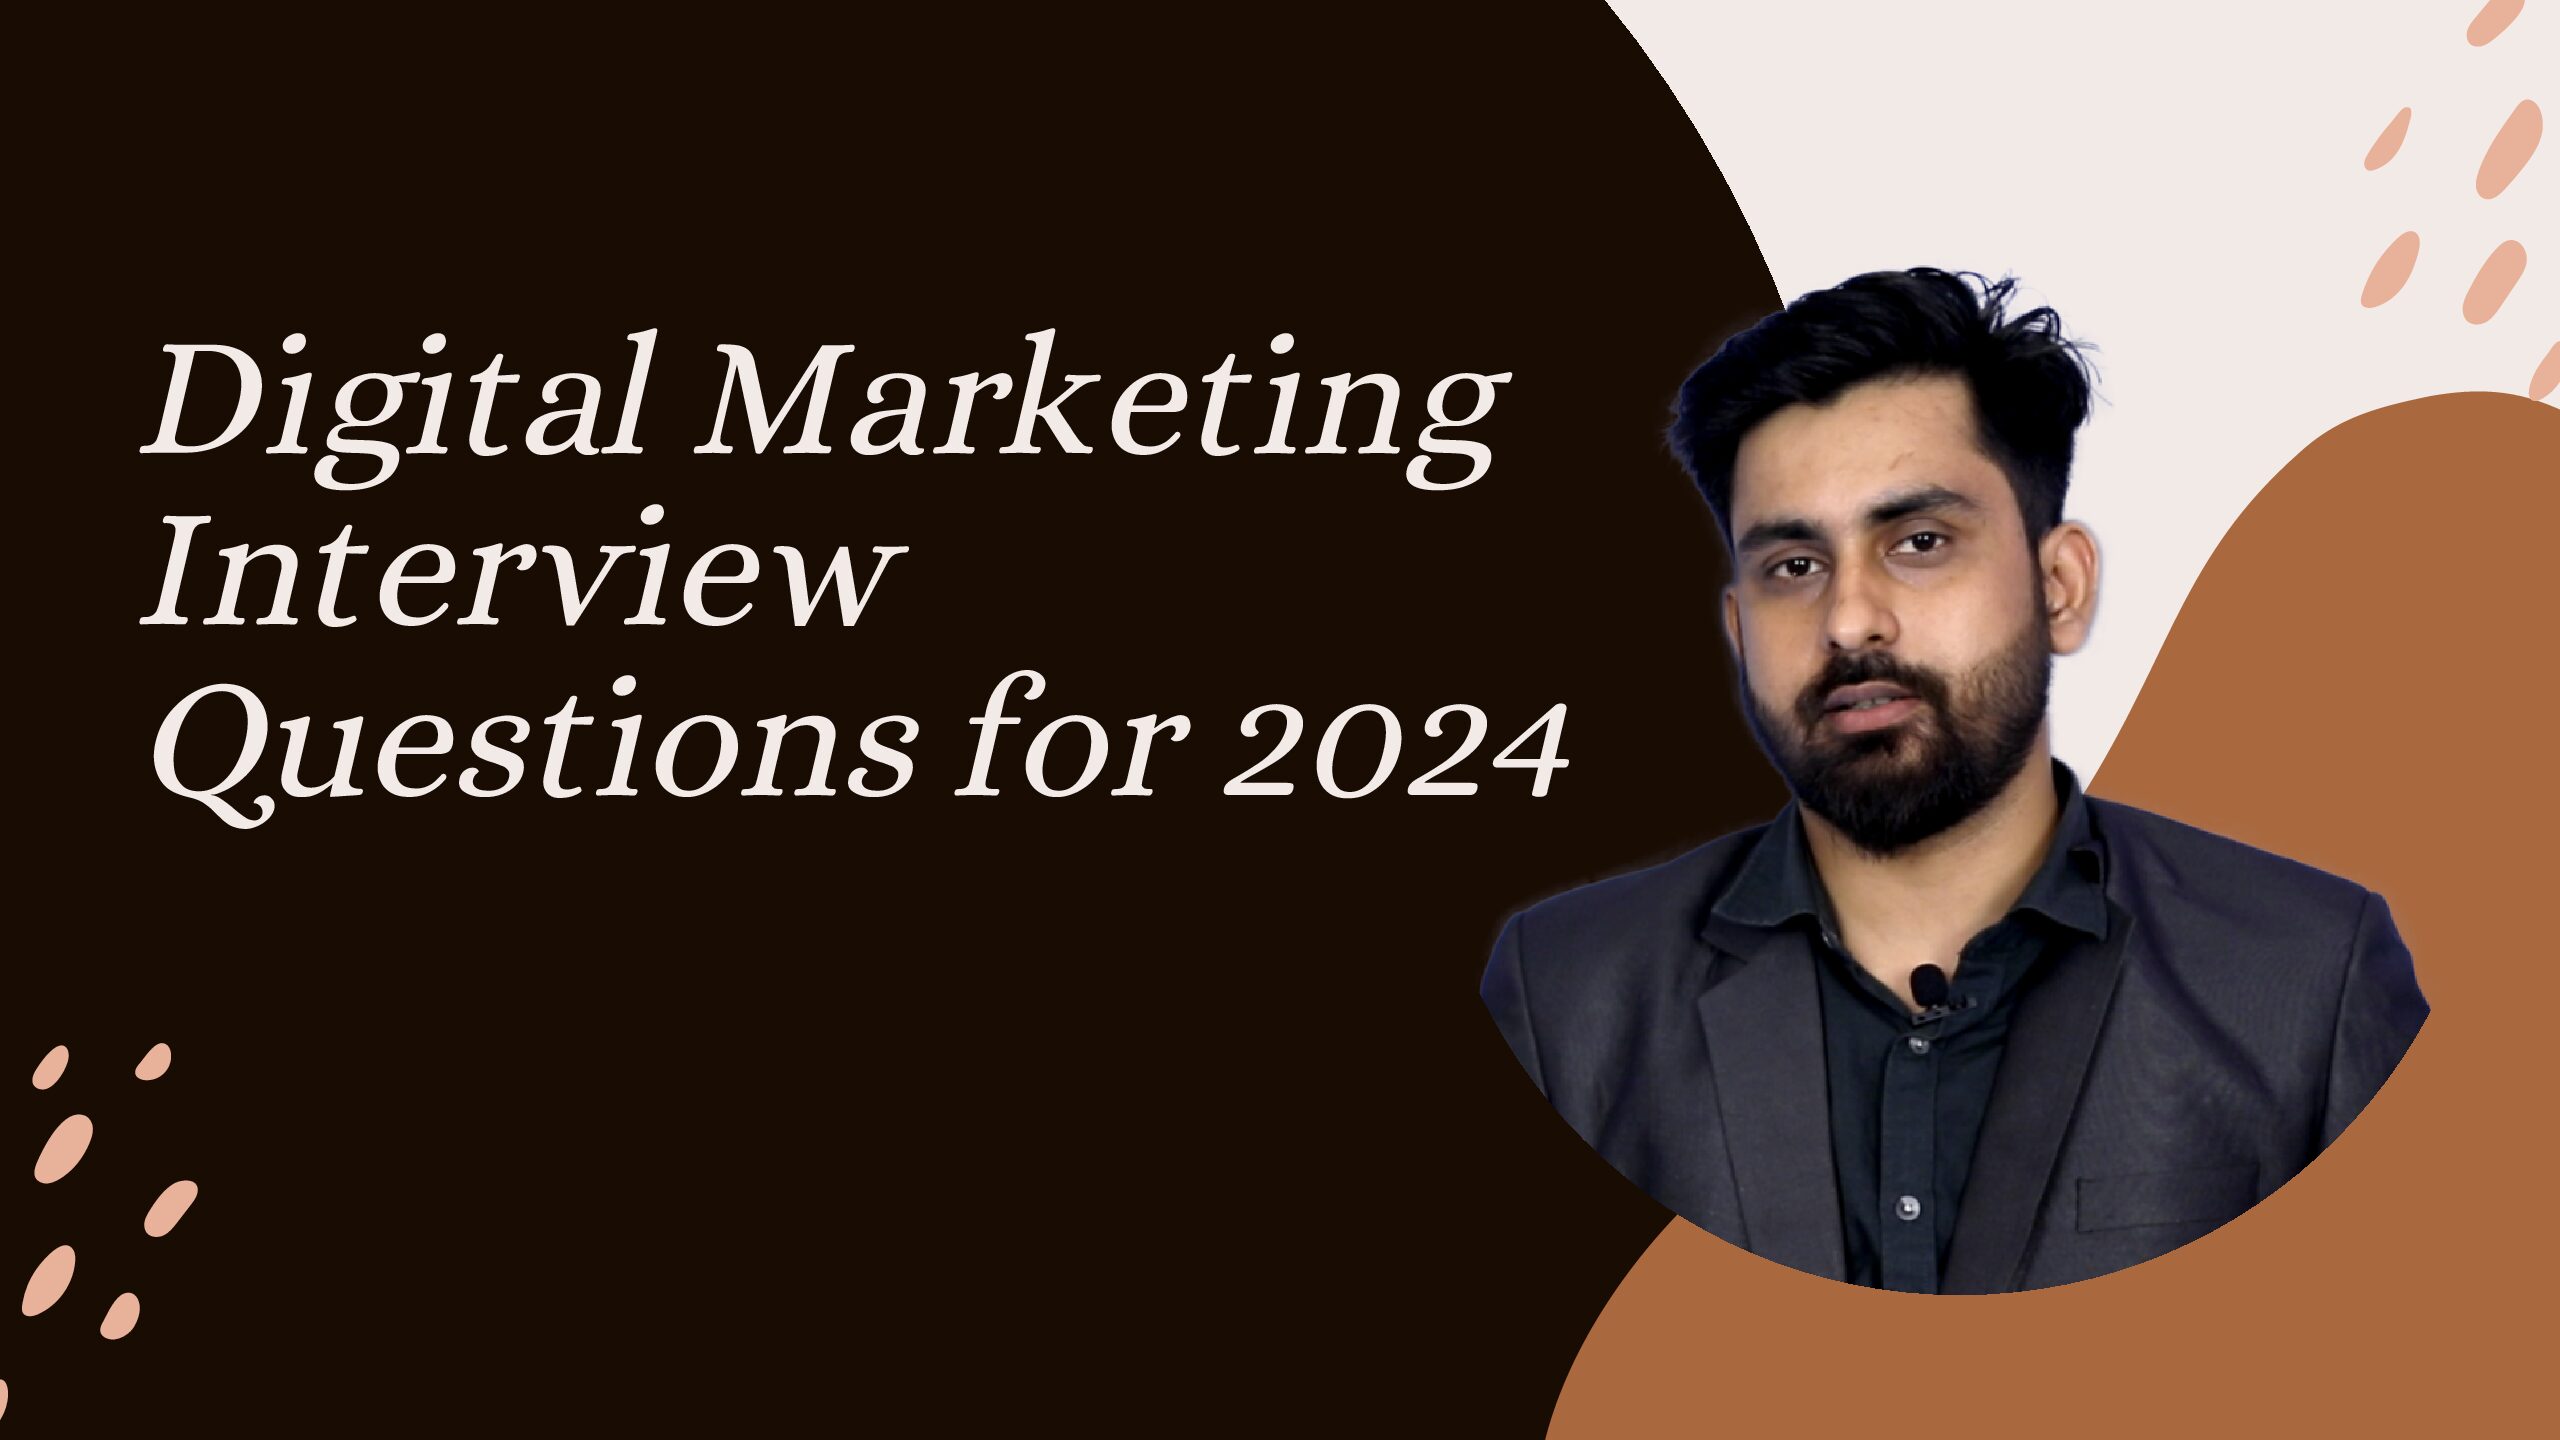 Digital Marketing Interview Questions for 2024